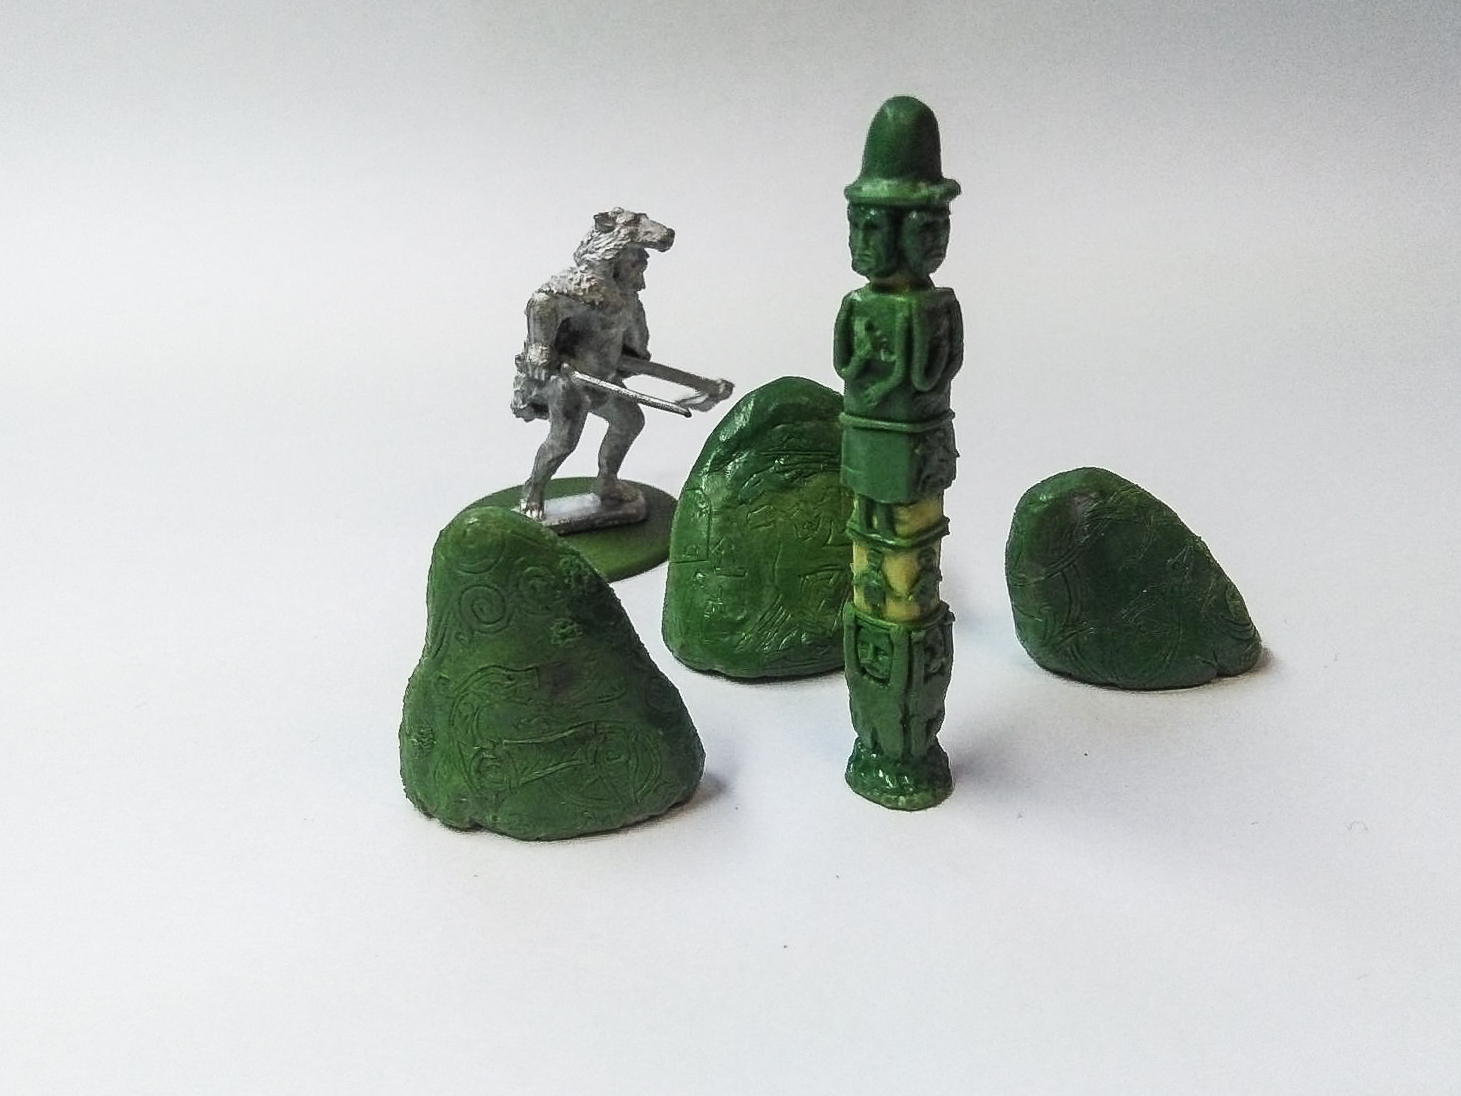 New scenery line from Terrains4Games : Pagan lands